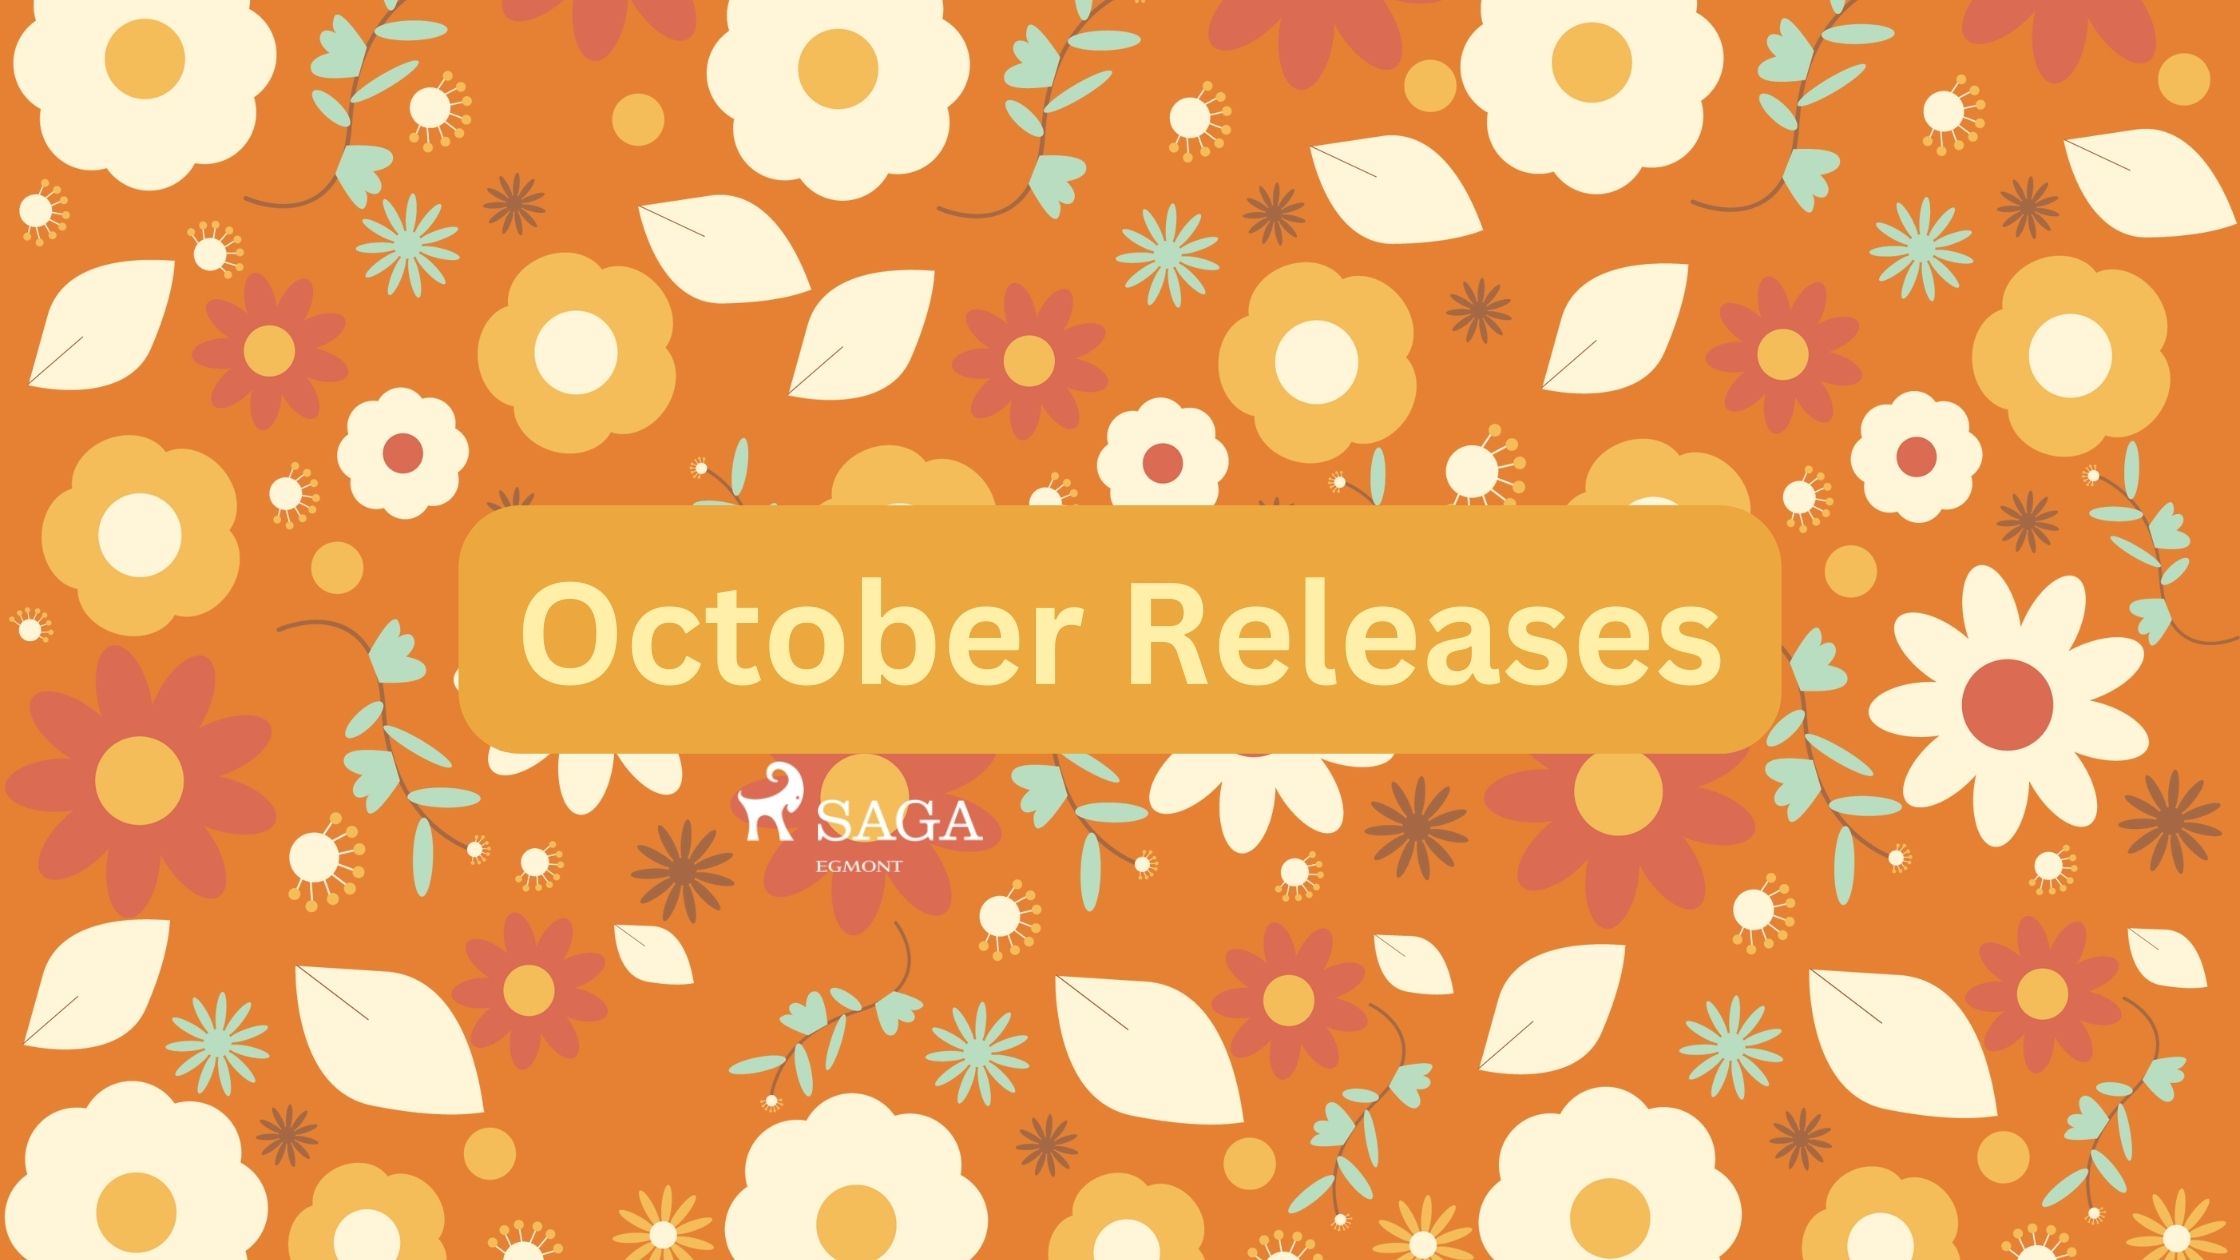 New Exciting Books from SAGA this October